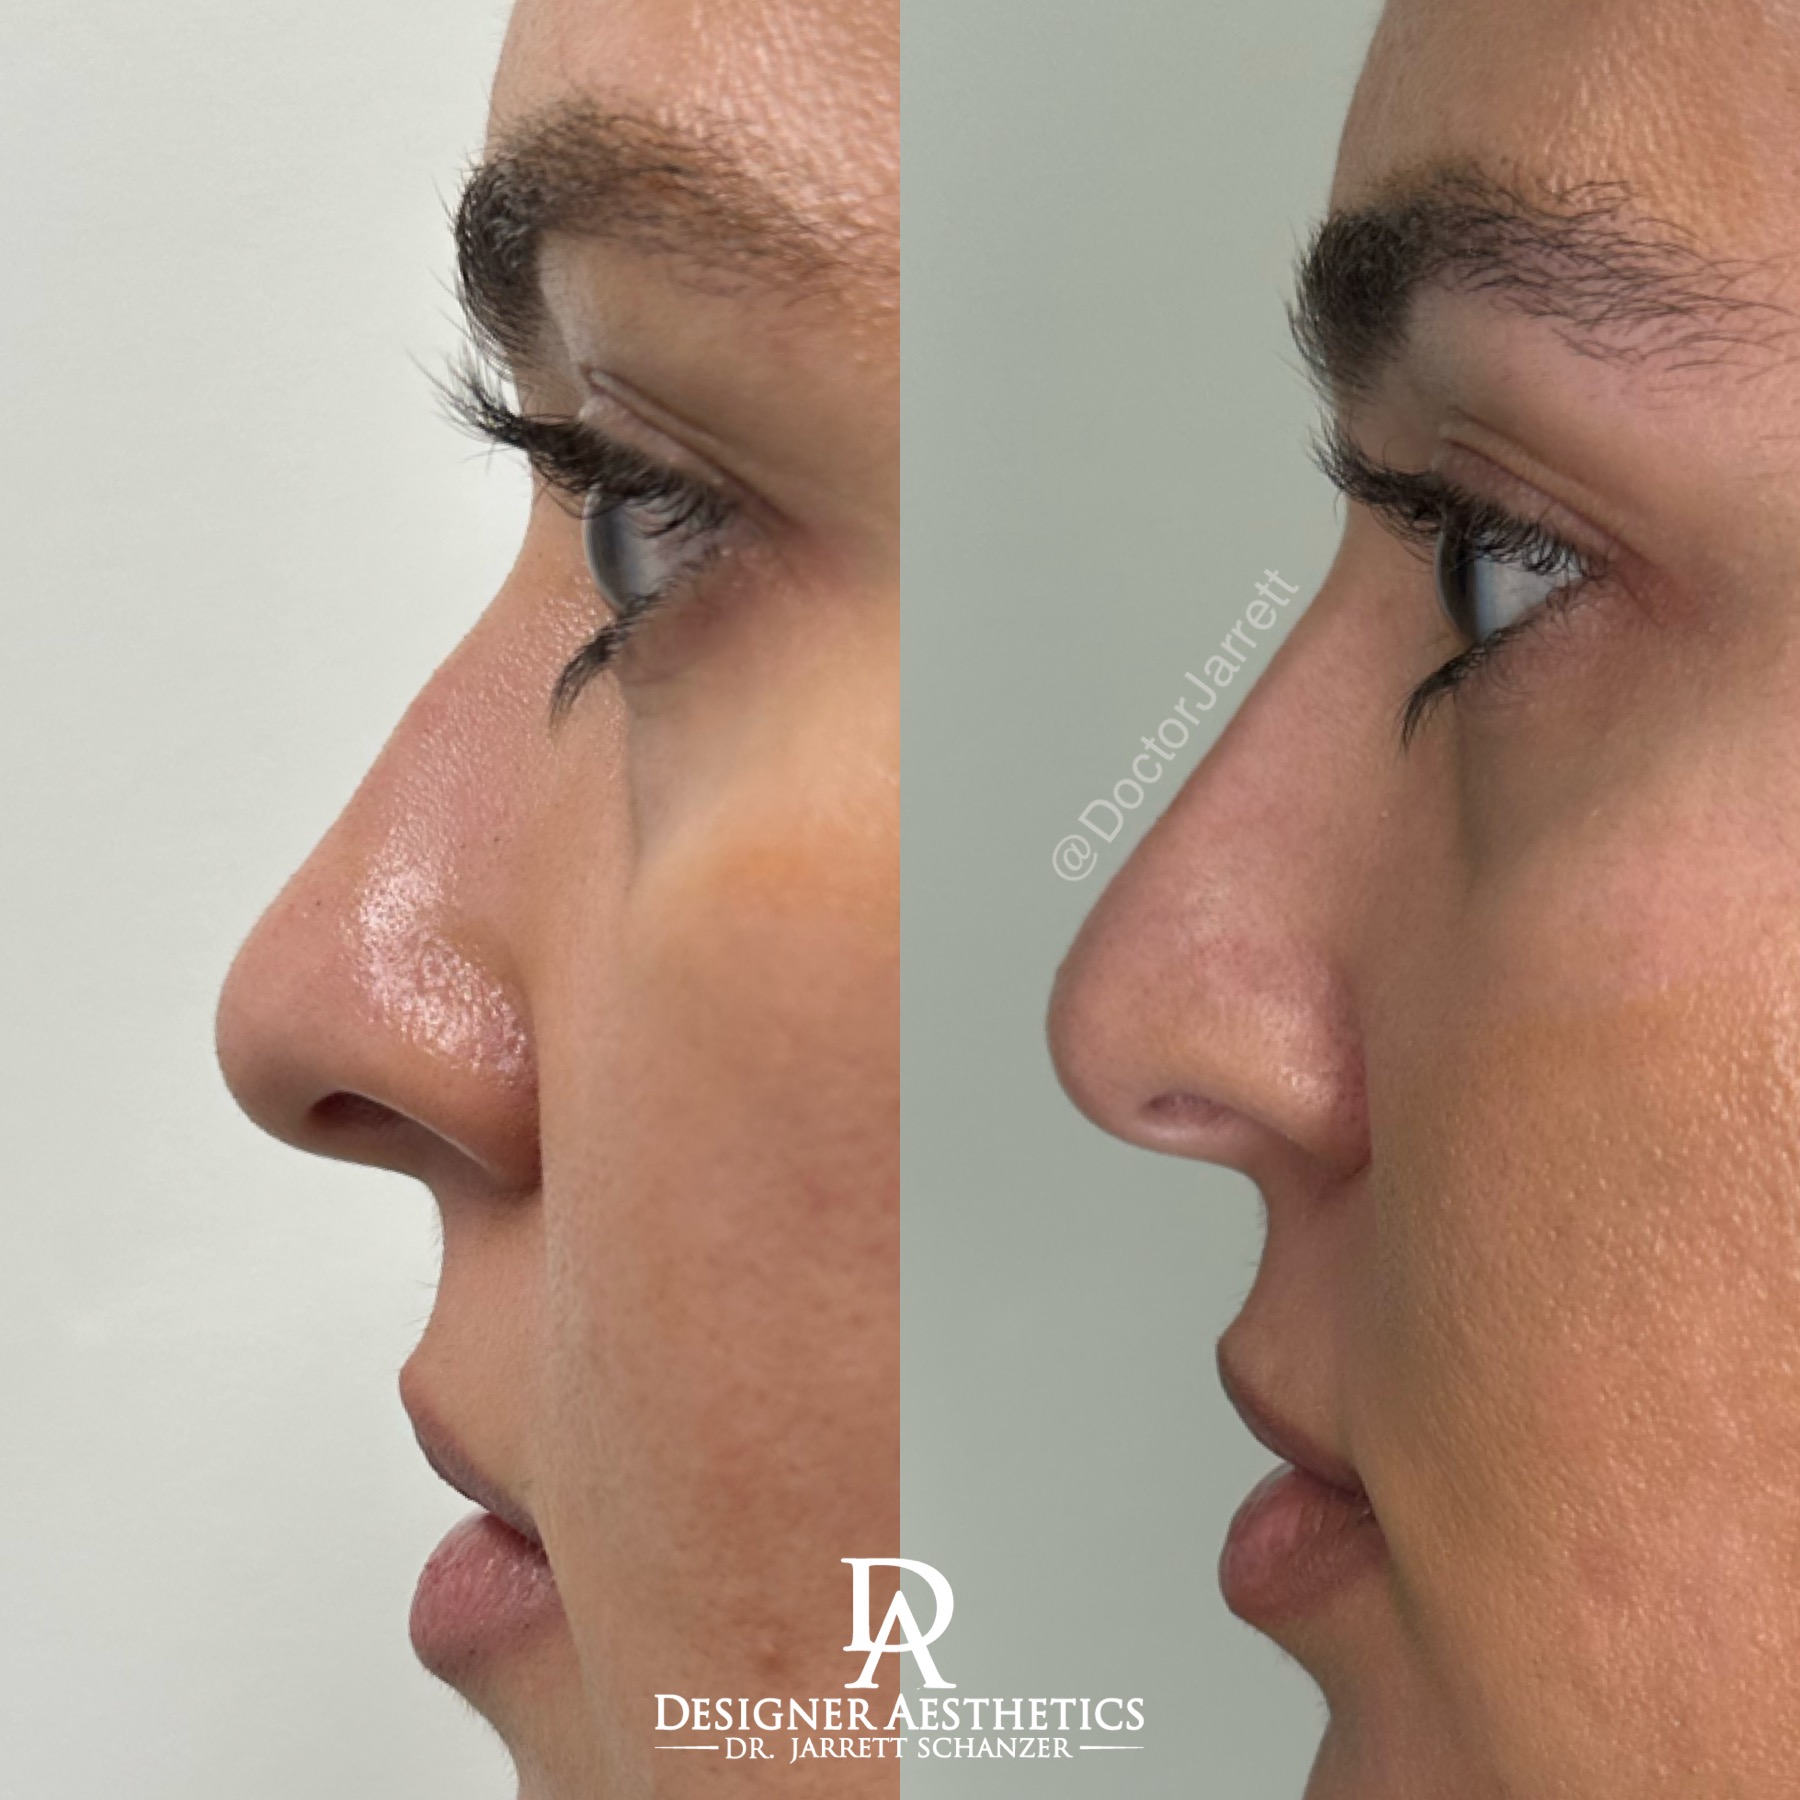 Nonsurgical Rhinoplastynose nose job injector injecting fillers botox no surgery best nose job americas top 100 injector doctor miami new york brickell south beach soho miami beach med spa aesthetics beauty transformation injection liquid nose job